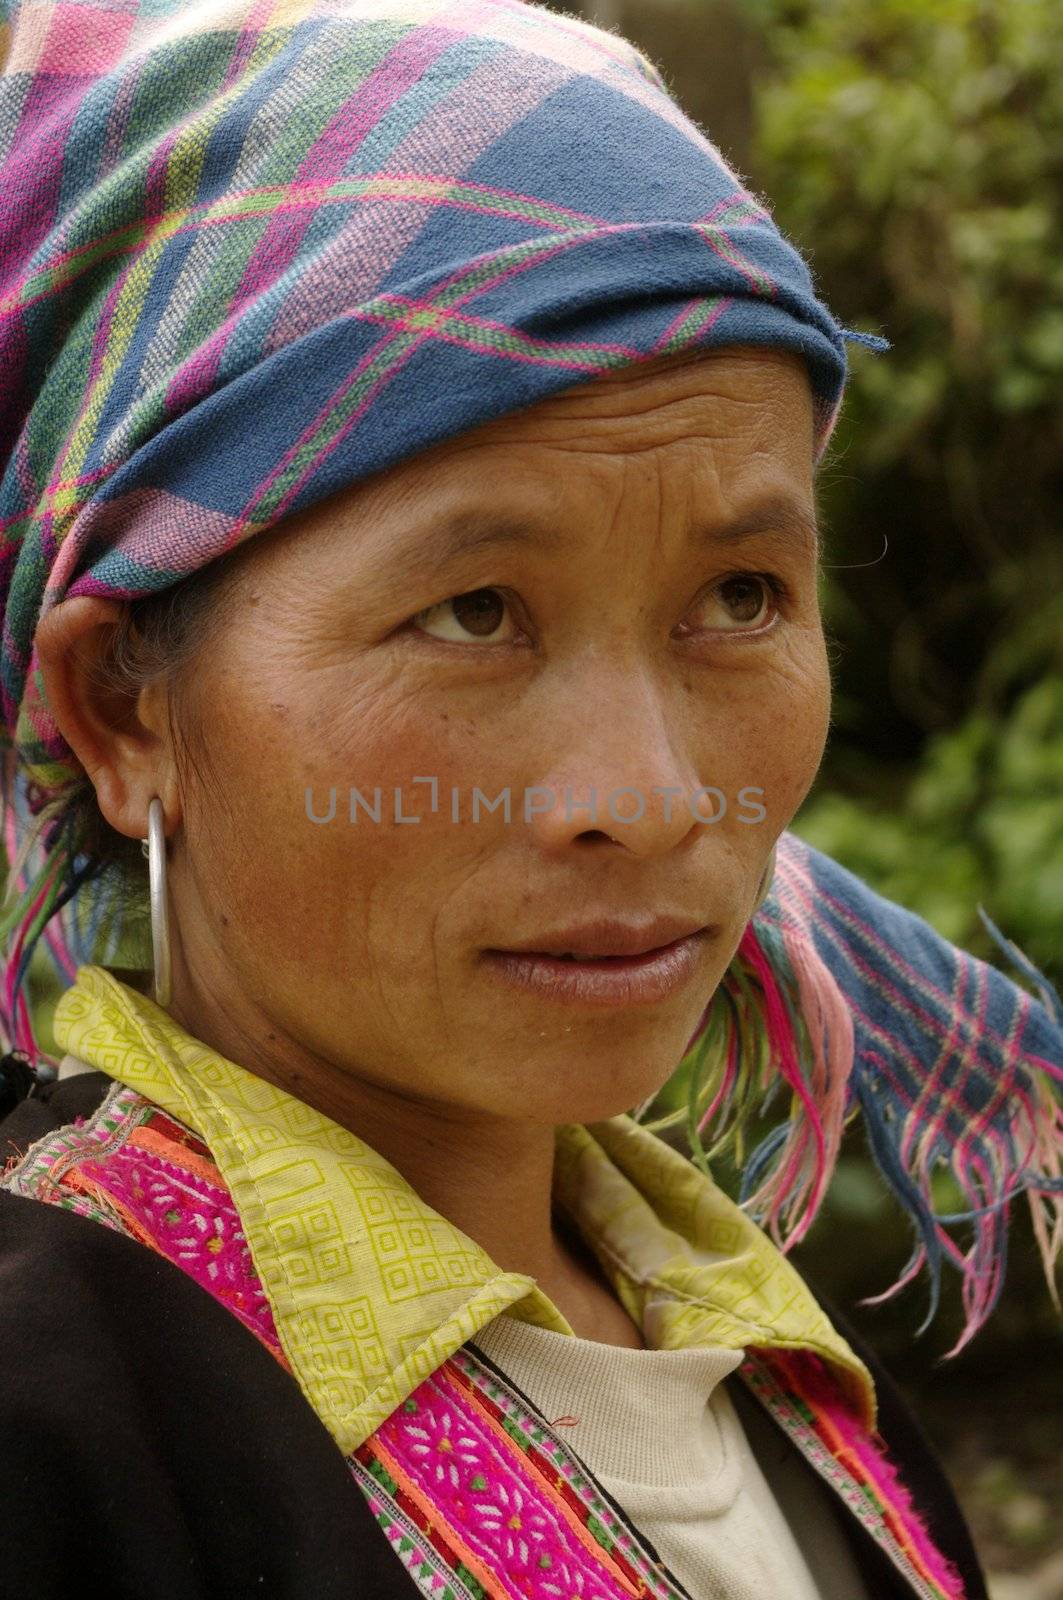 Flowered Hmong female by Duroc